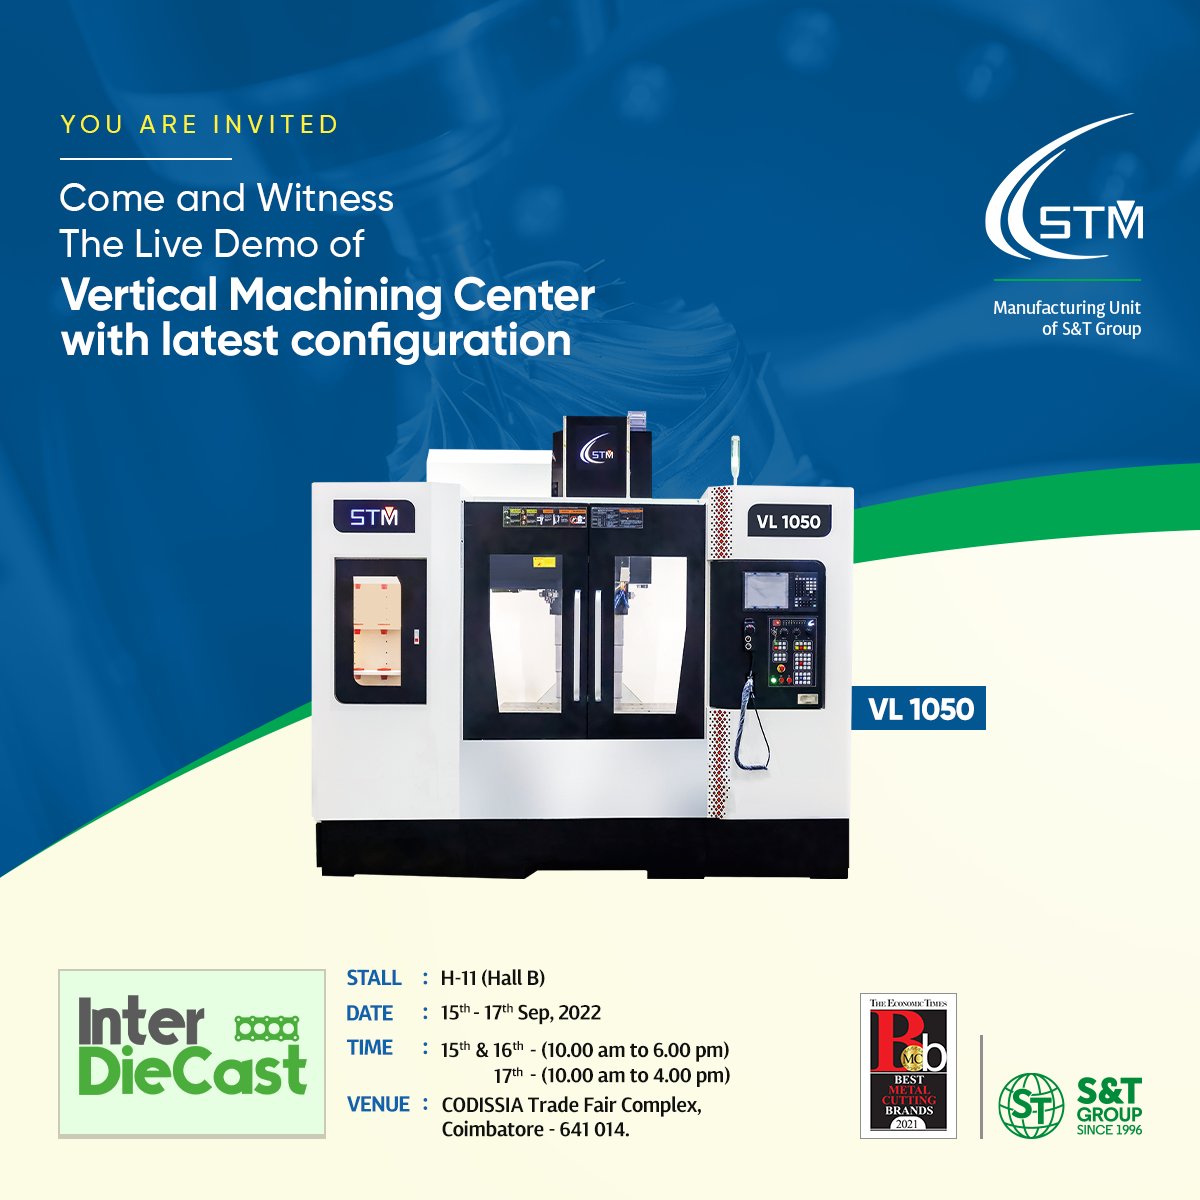 We Welcome You All!
Come and Witness the Live Demo of Vertical Machining Center with latest configuration
#interdiecast #interfoundry #cnc #cncmachine #cncmachining #machining #verticalmachiningcenter #dieandmold #manufacturing #foundry #machinetools #coimbatore #machinetoolsexpo